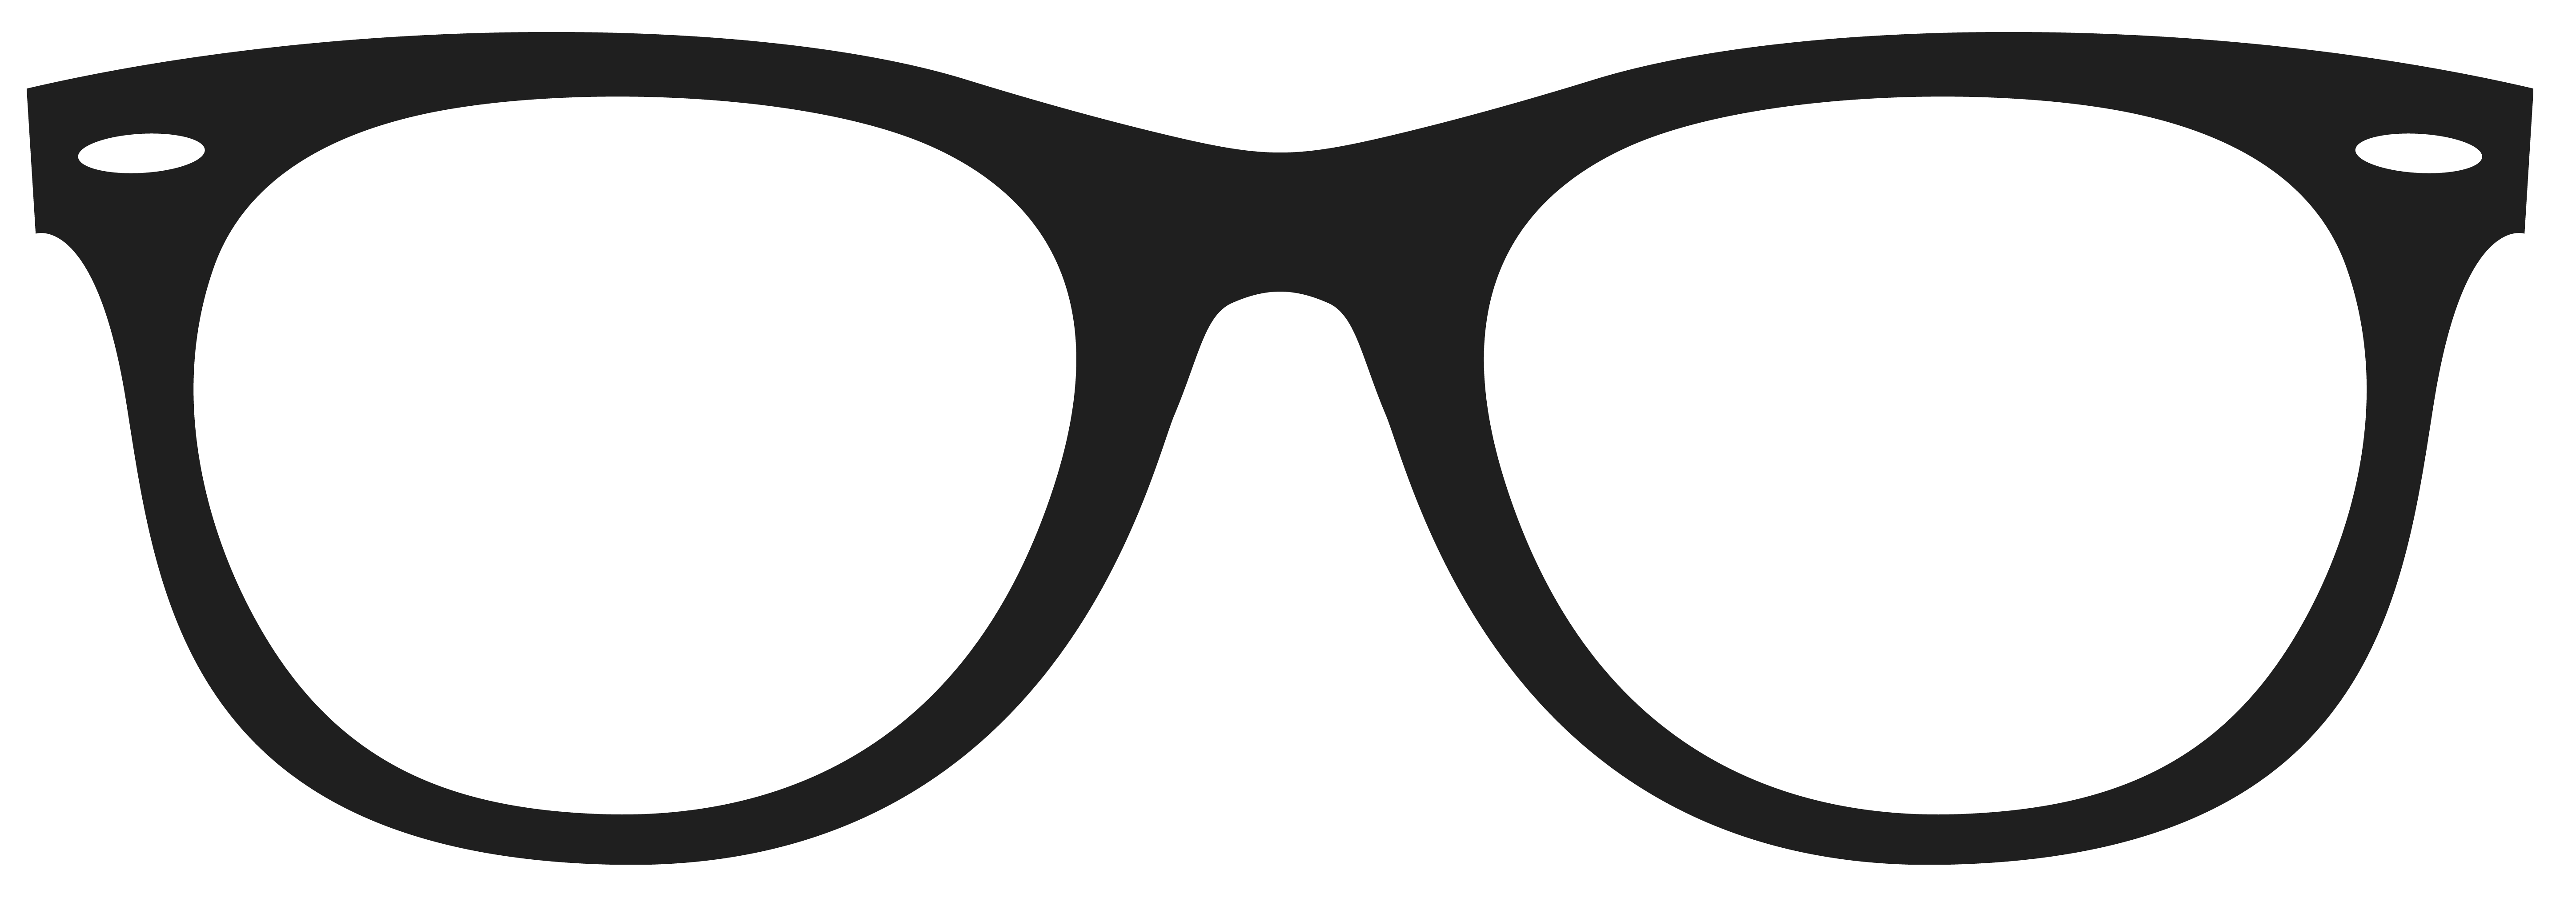 sunglasses-lacoste-eyewear-color-glasses-png-image-png-download